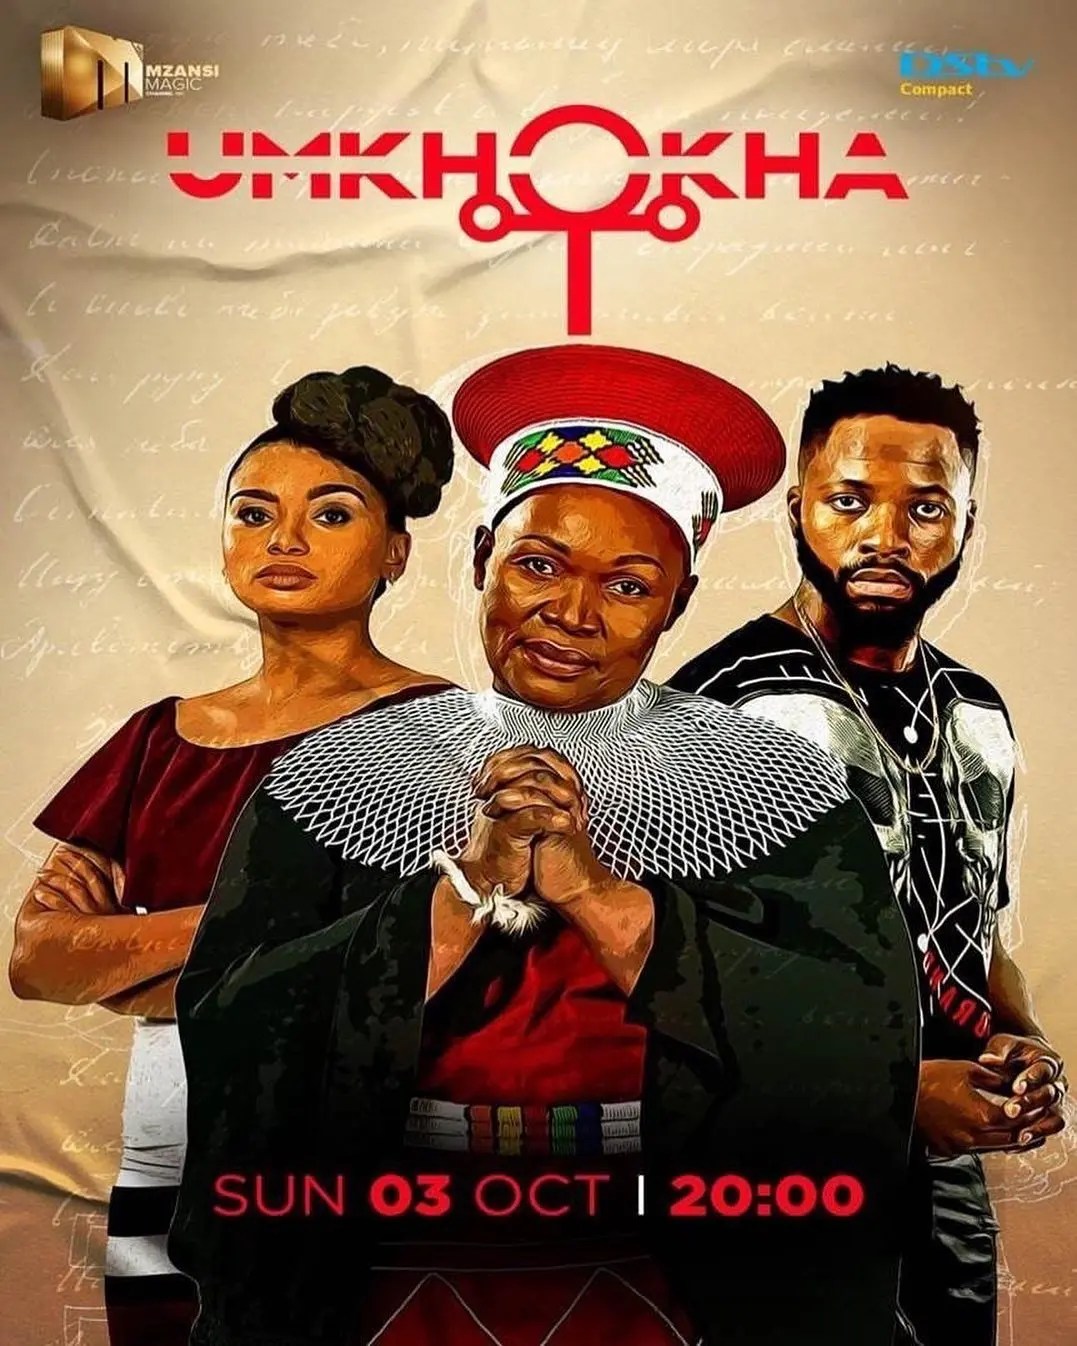 Umkhokha drama series labeled an insult to the Shembe church